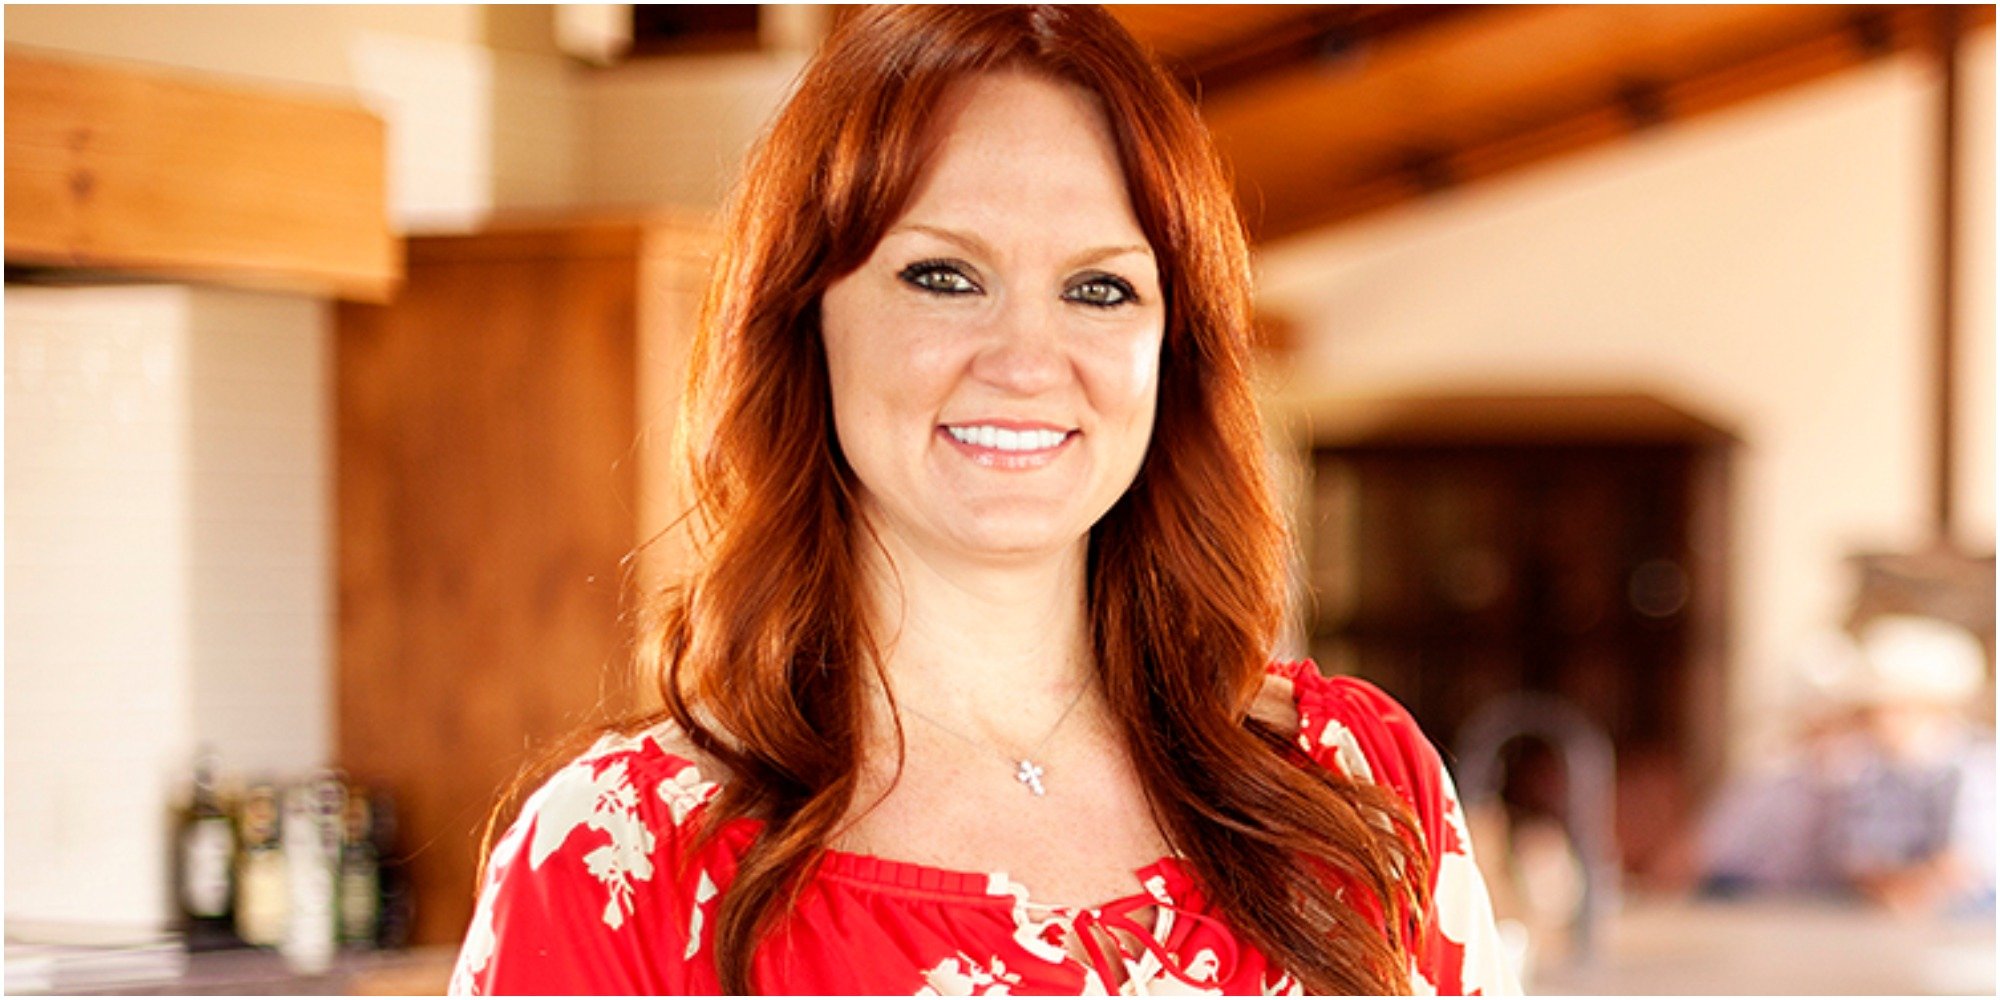 Ree Drummond smiles wearing a red shirt